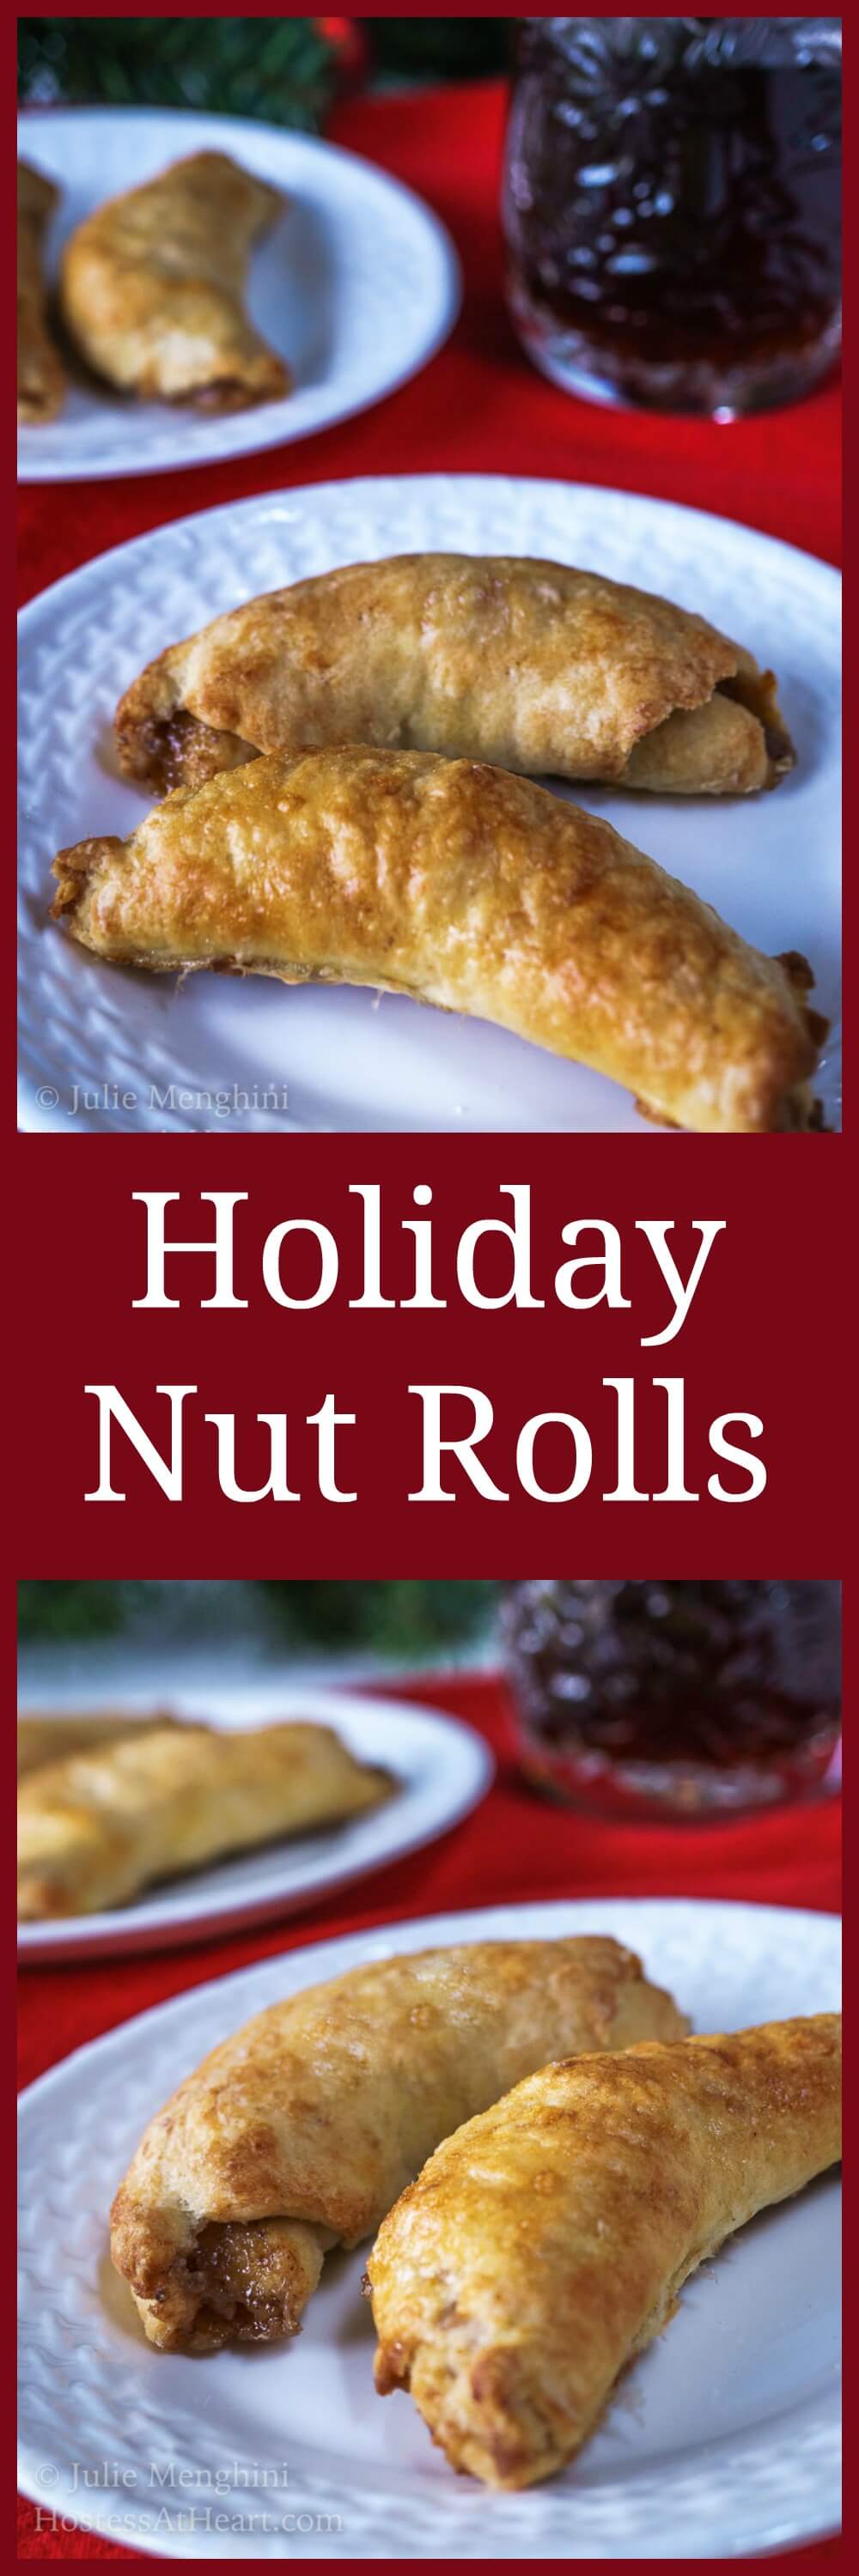 Buttery Pastry Holiday Nut Rolls Recipe | Hostess At Heart